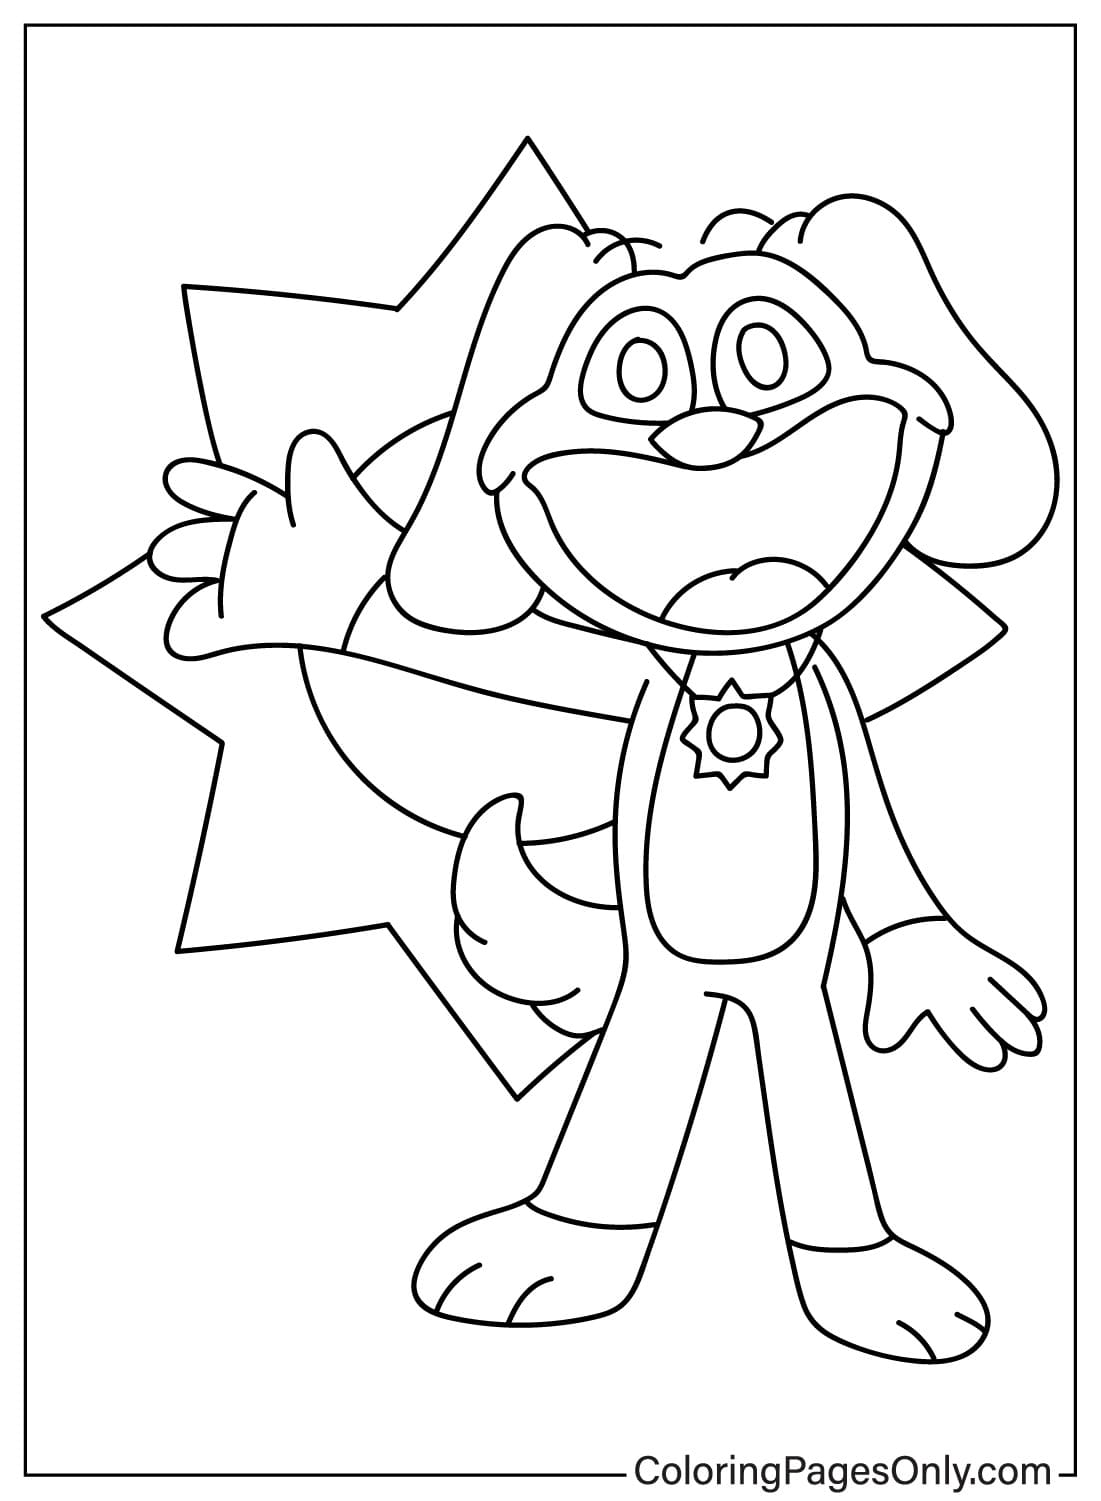 DogDay Coloring Page - Free Printable ...